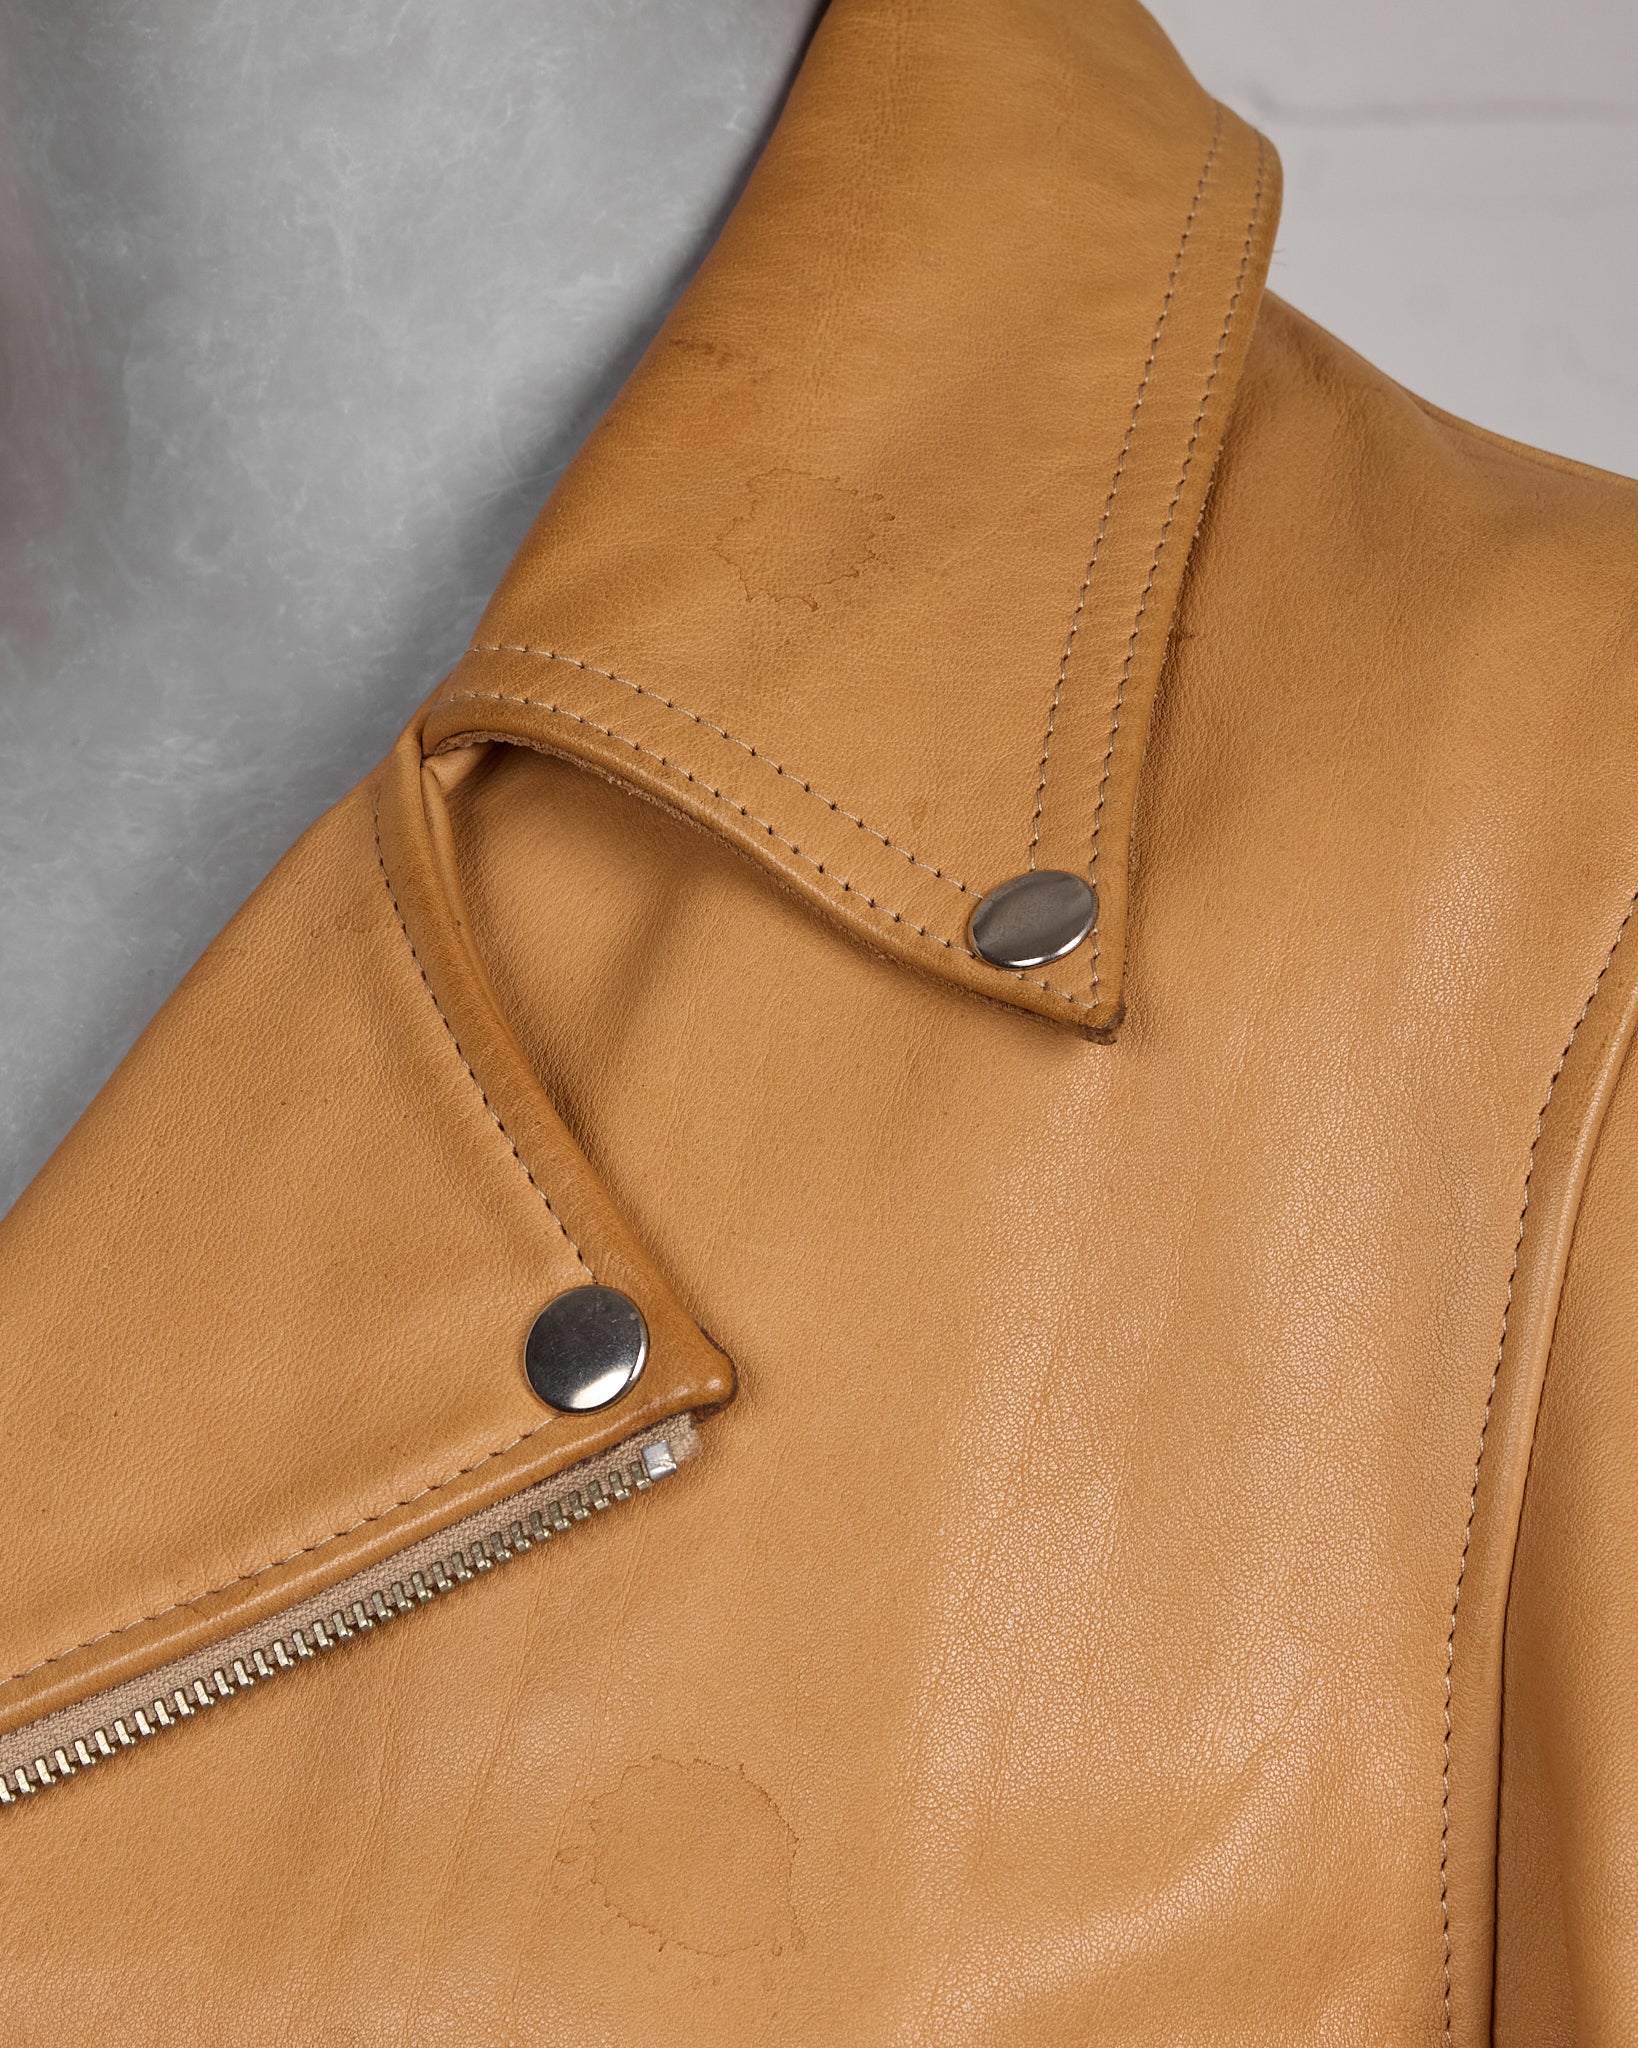 Raf Simons Leather Riders Jacket - AW03 “Closer” detail photo